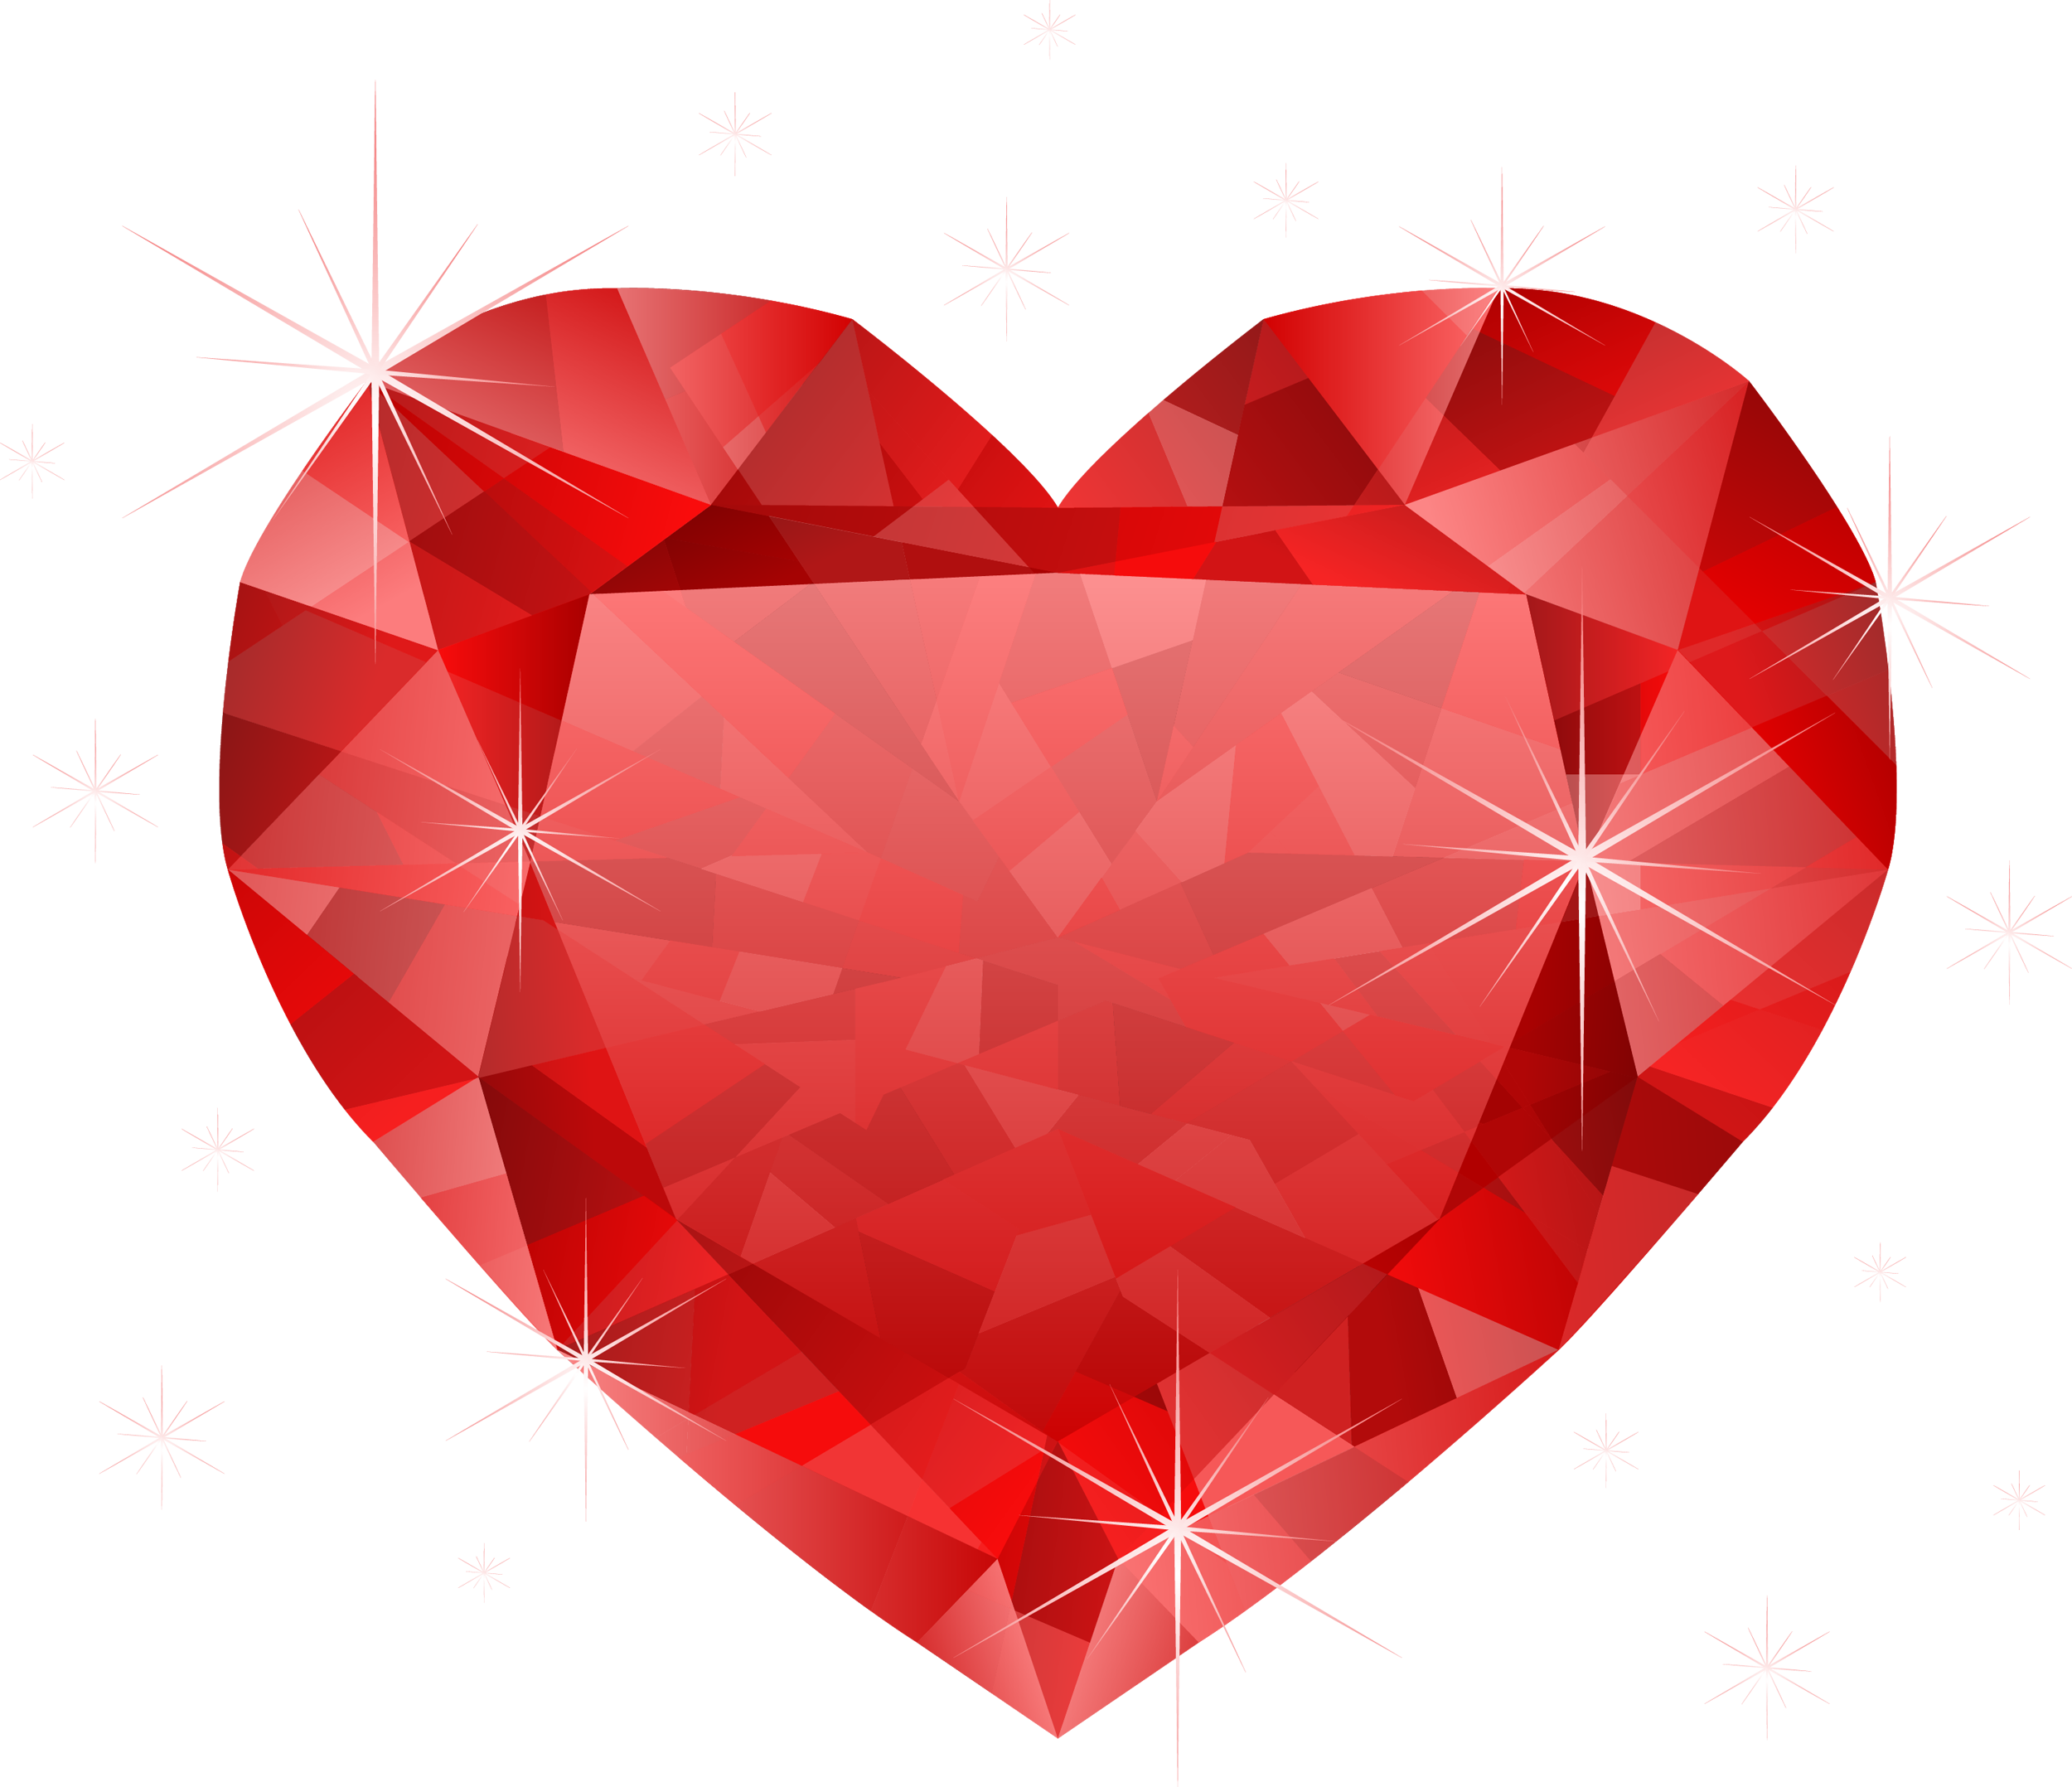 Dancing clipart heart. Large transparent diamond red